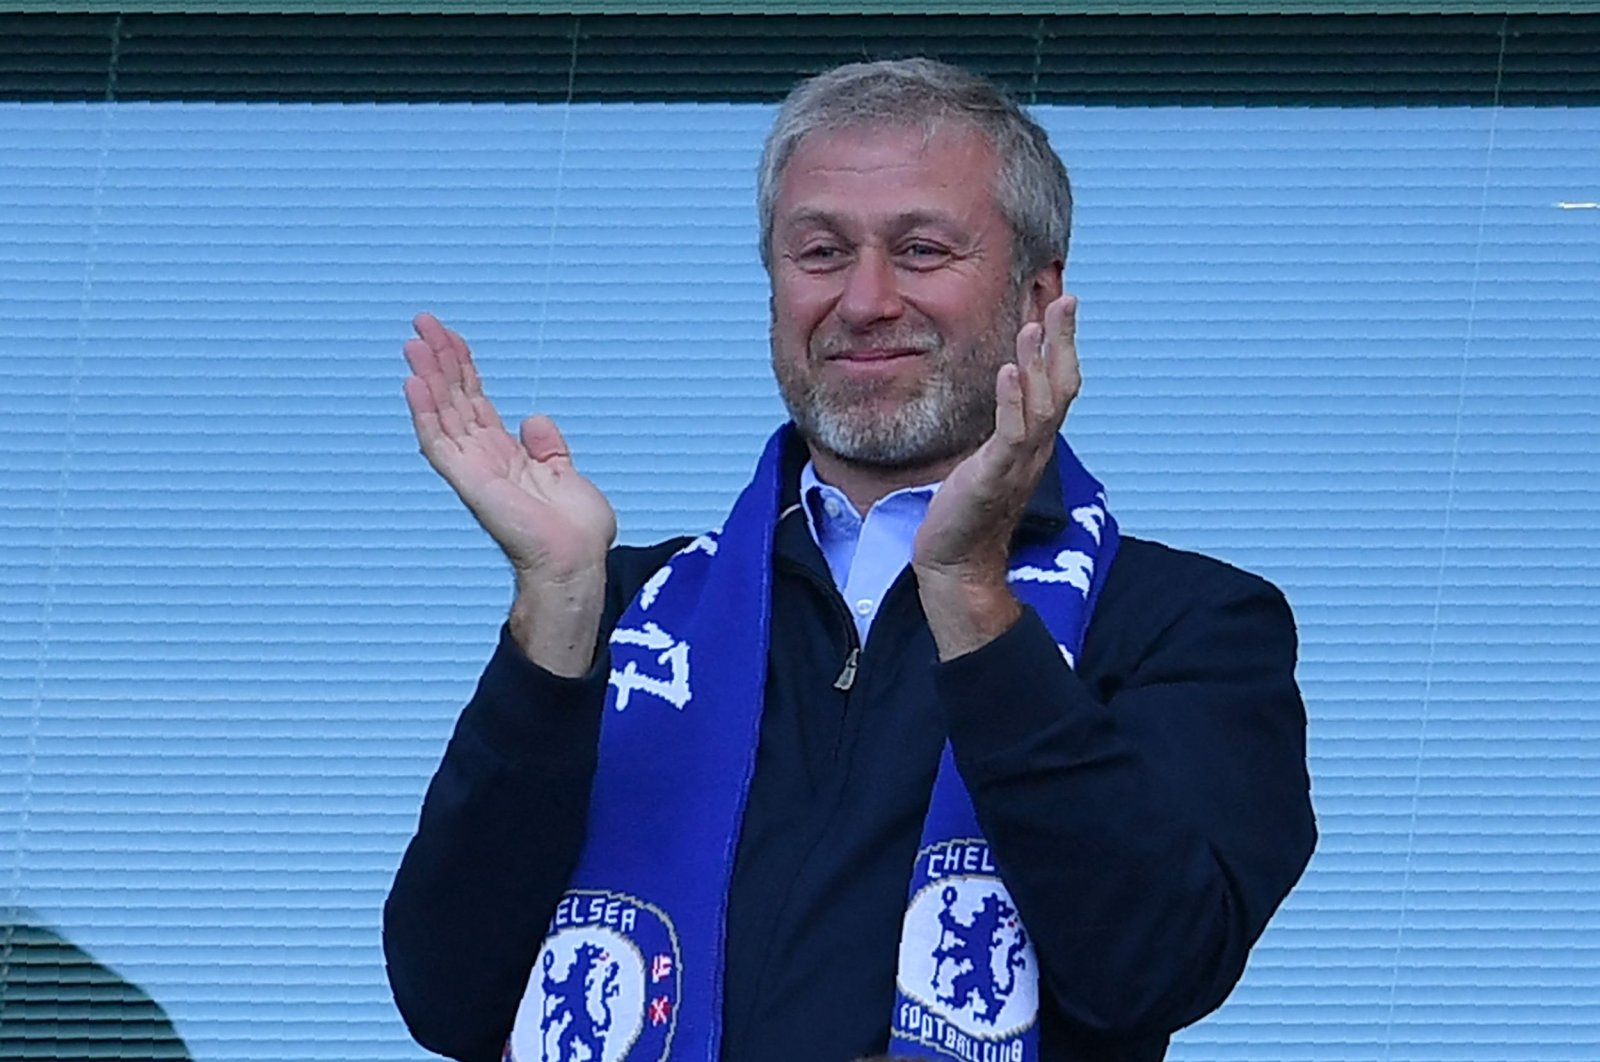 Chelsea&#039;s Russian owner Roman Abramovich applauds, as players celebrate their league title win at the end of a Premier League match against Sunderland, Stamford Bridge, London, England, May 21, 2017. (AFP Photo)